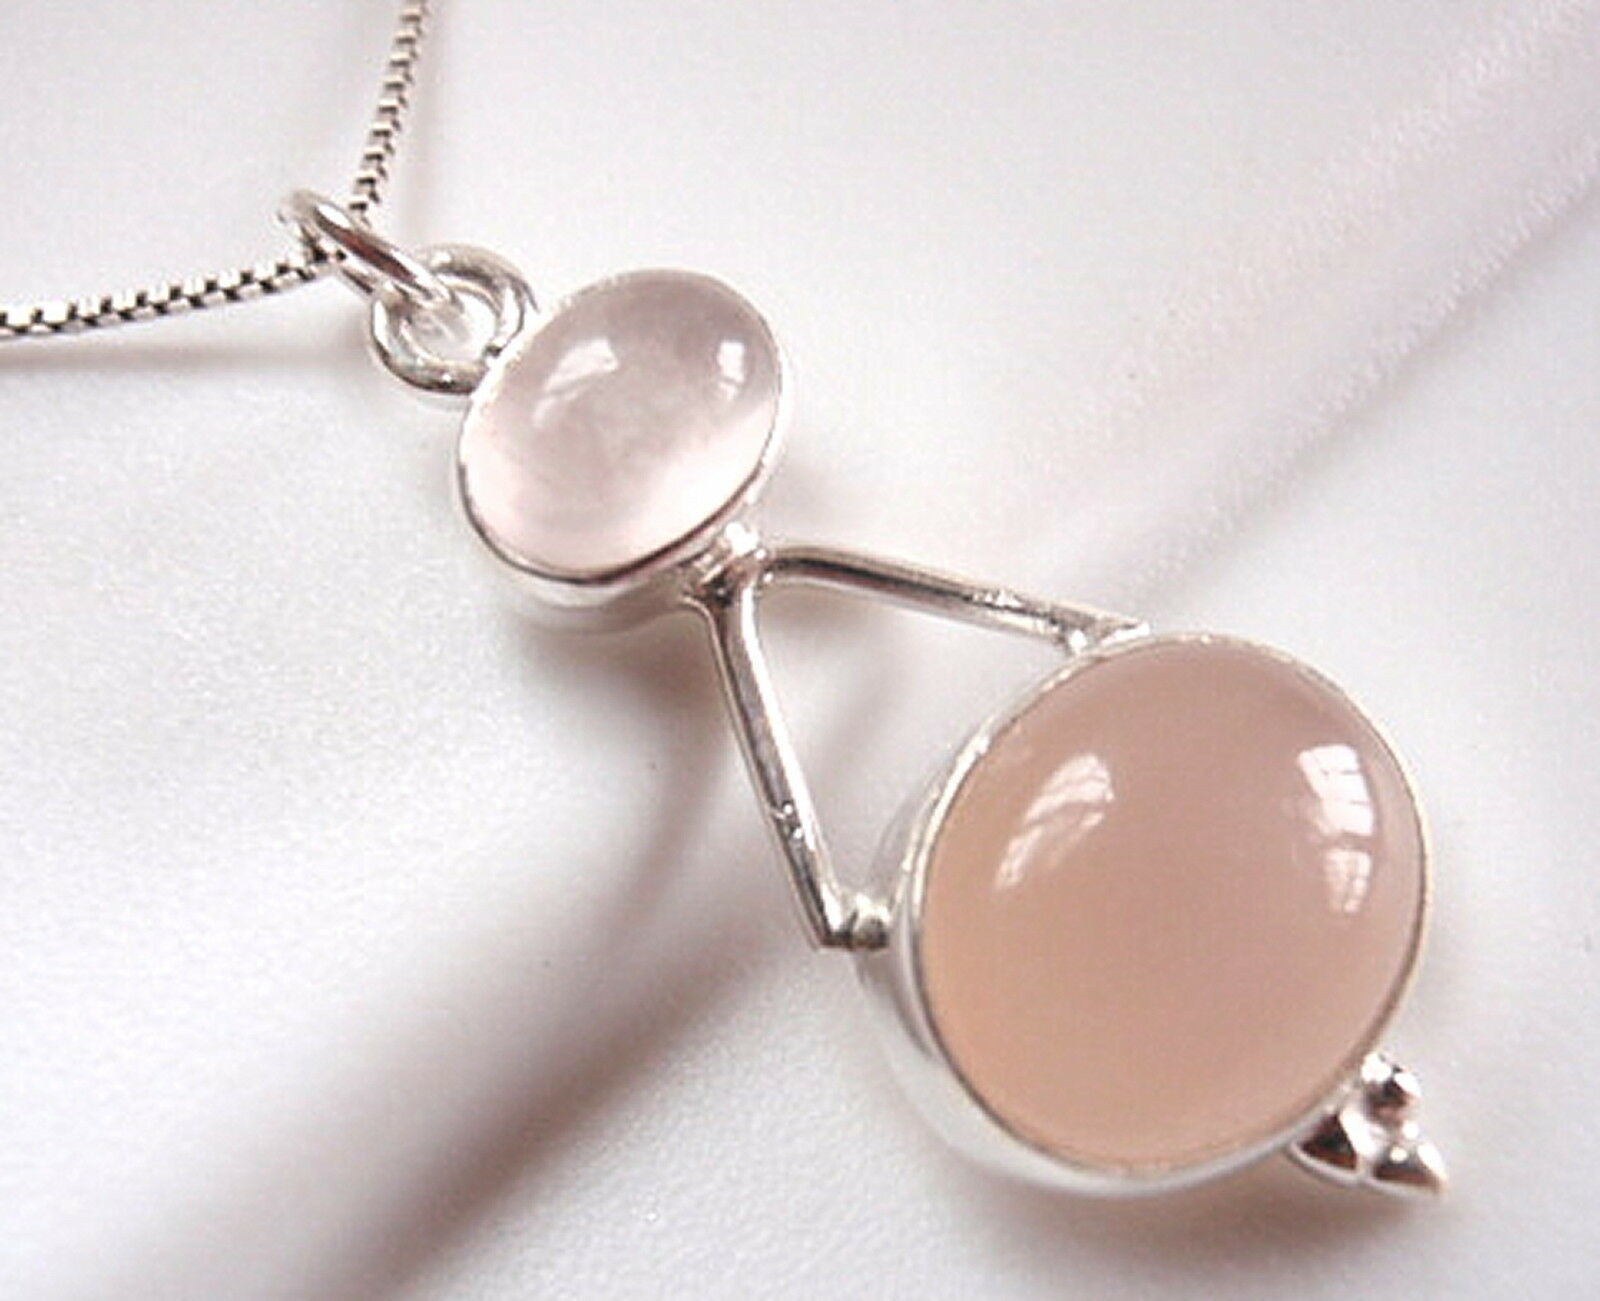 Primary image for Rose Quartz Double Gem Oval 925 Sterling Silver Pendant New Imported from India